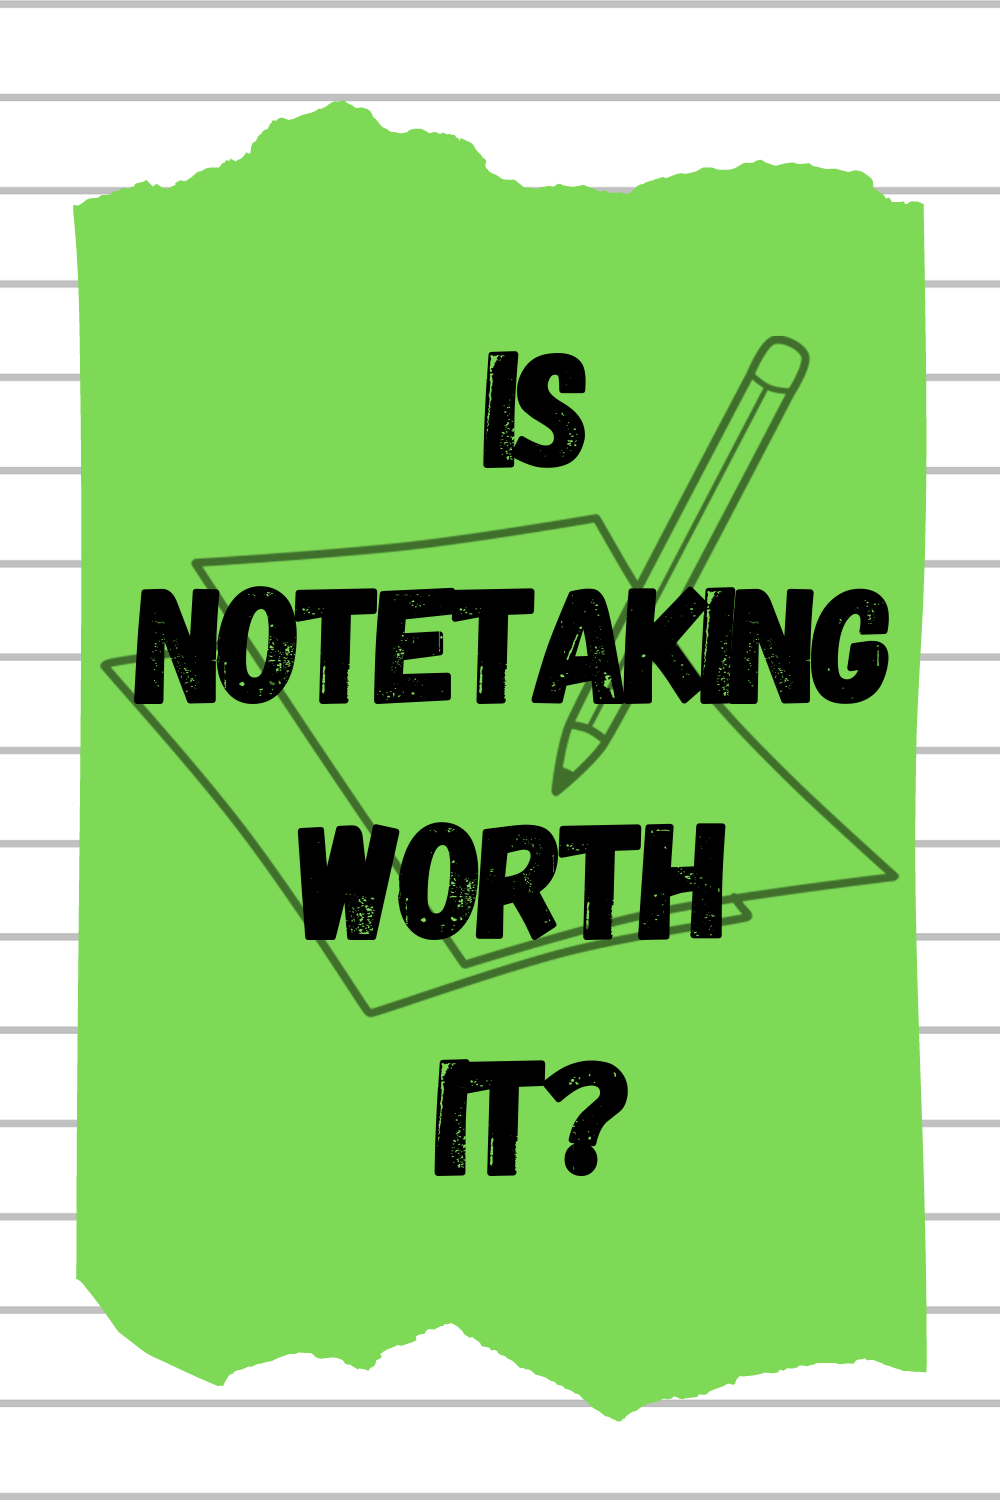 Is note taking worth it?